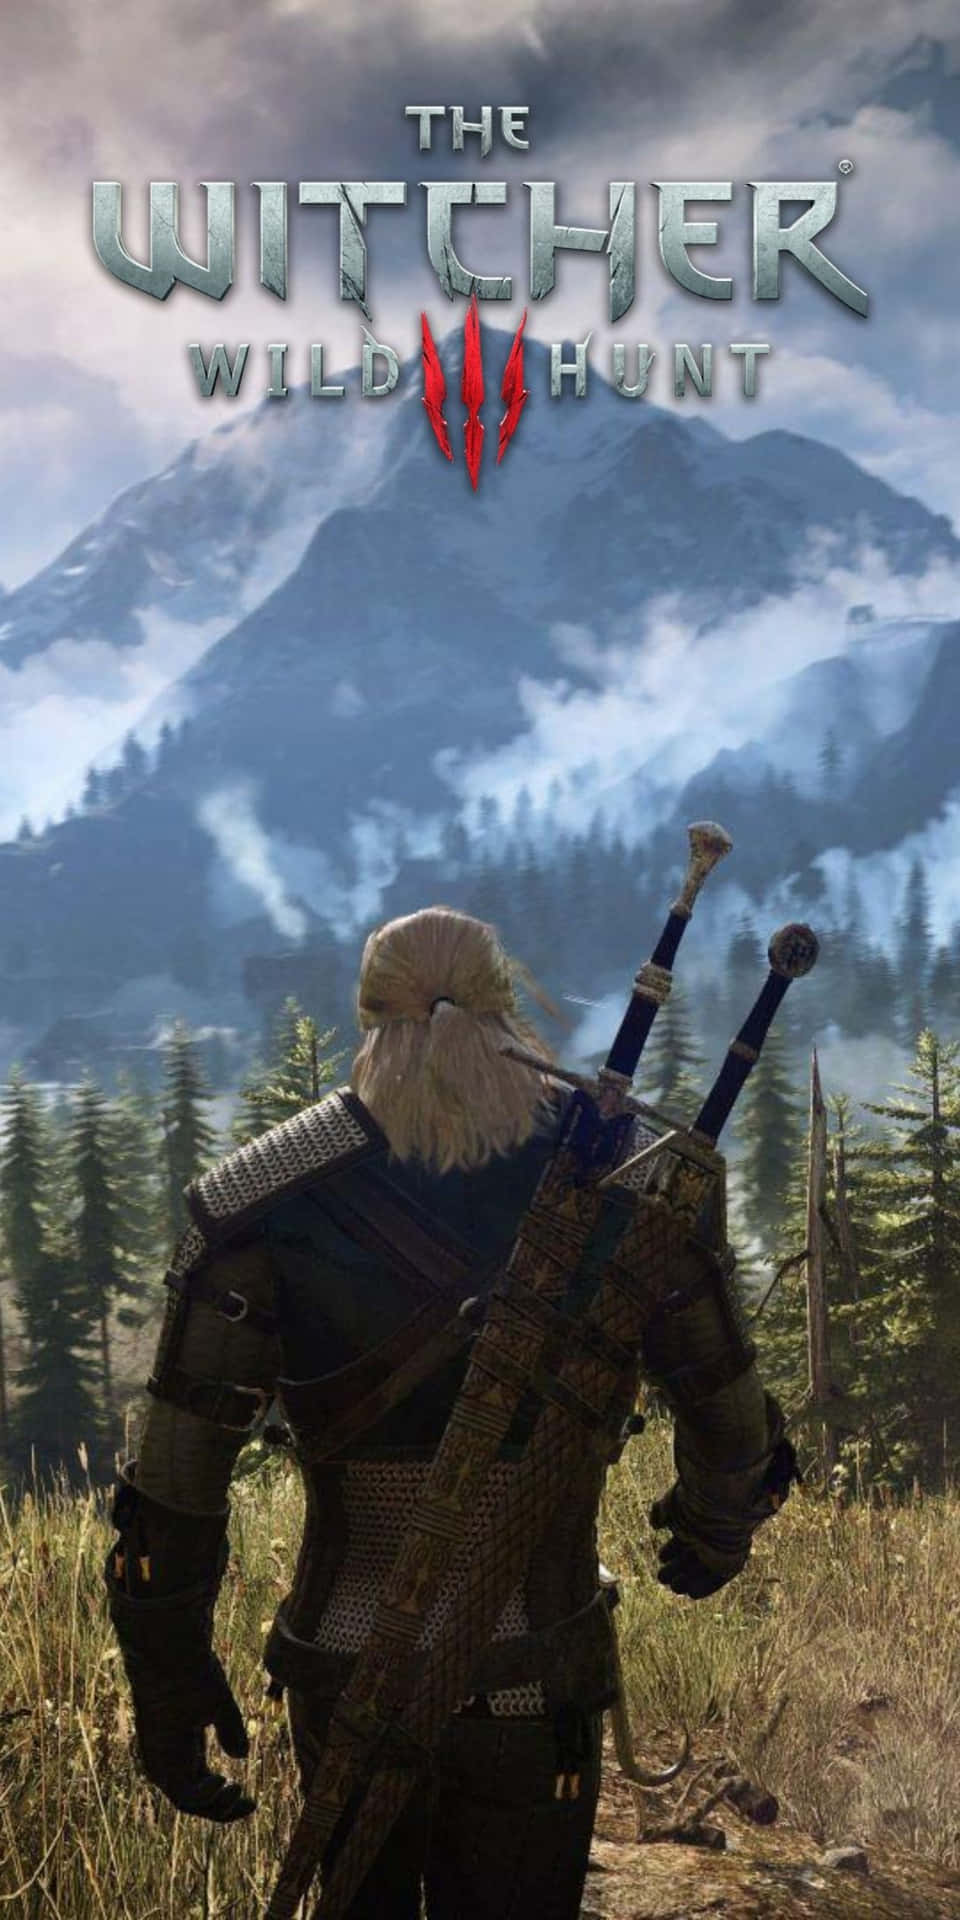 Enjoy the immersive adventures with The Witcher 3 game on your Pixel 3